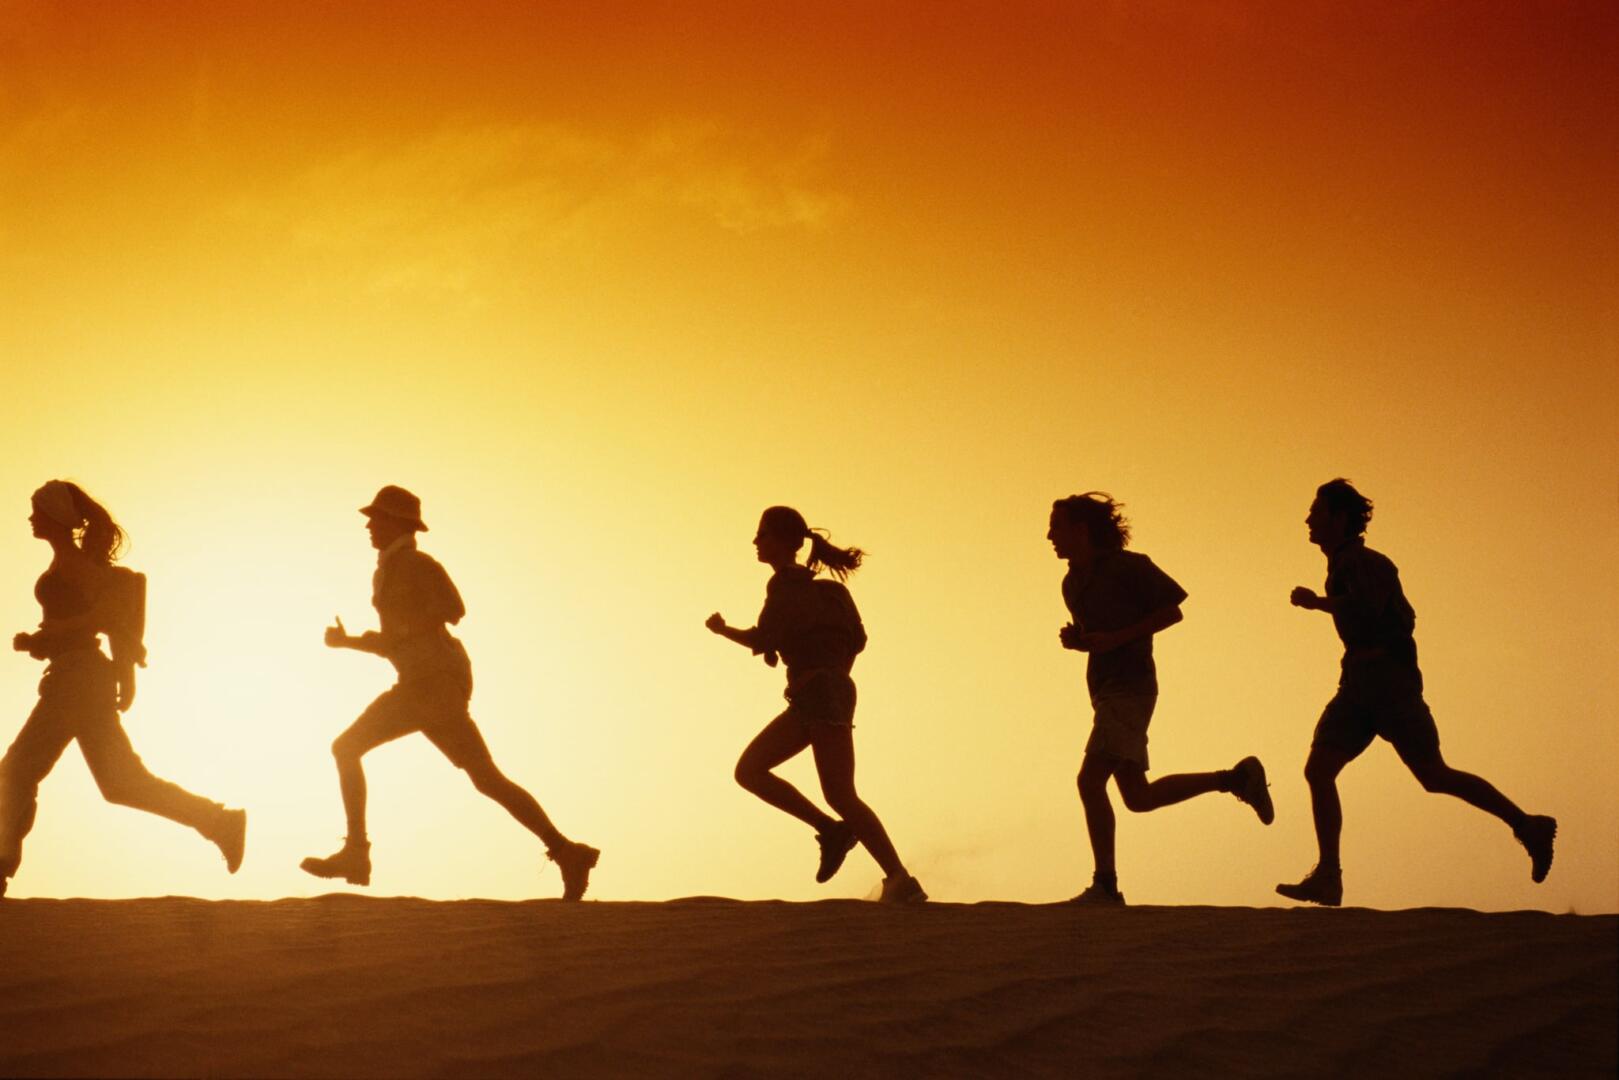 Silhouettes of people running at sunset.